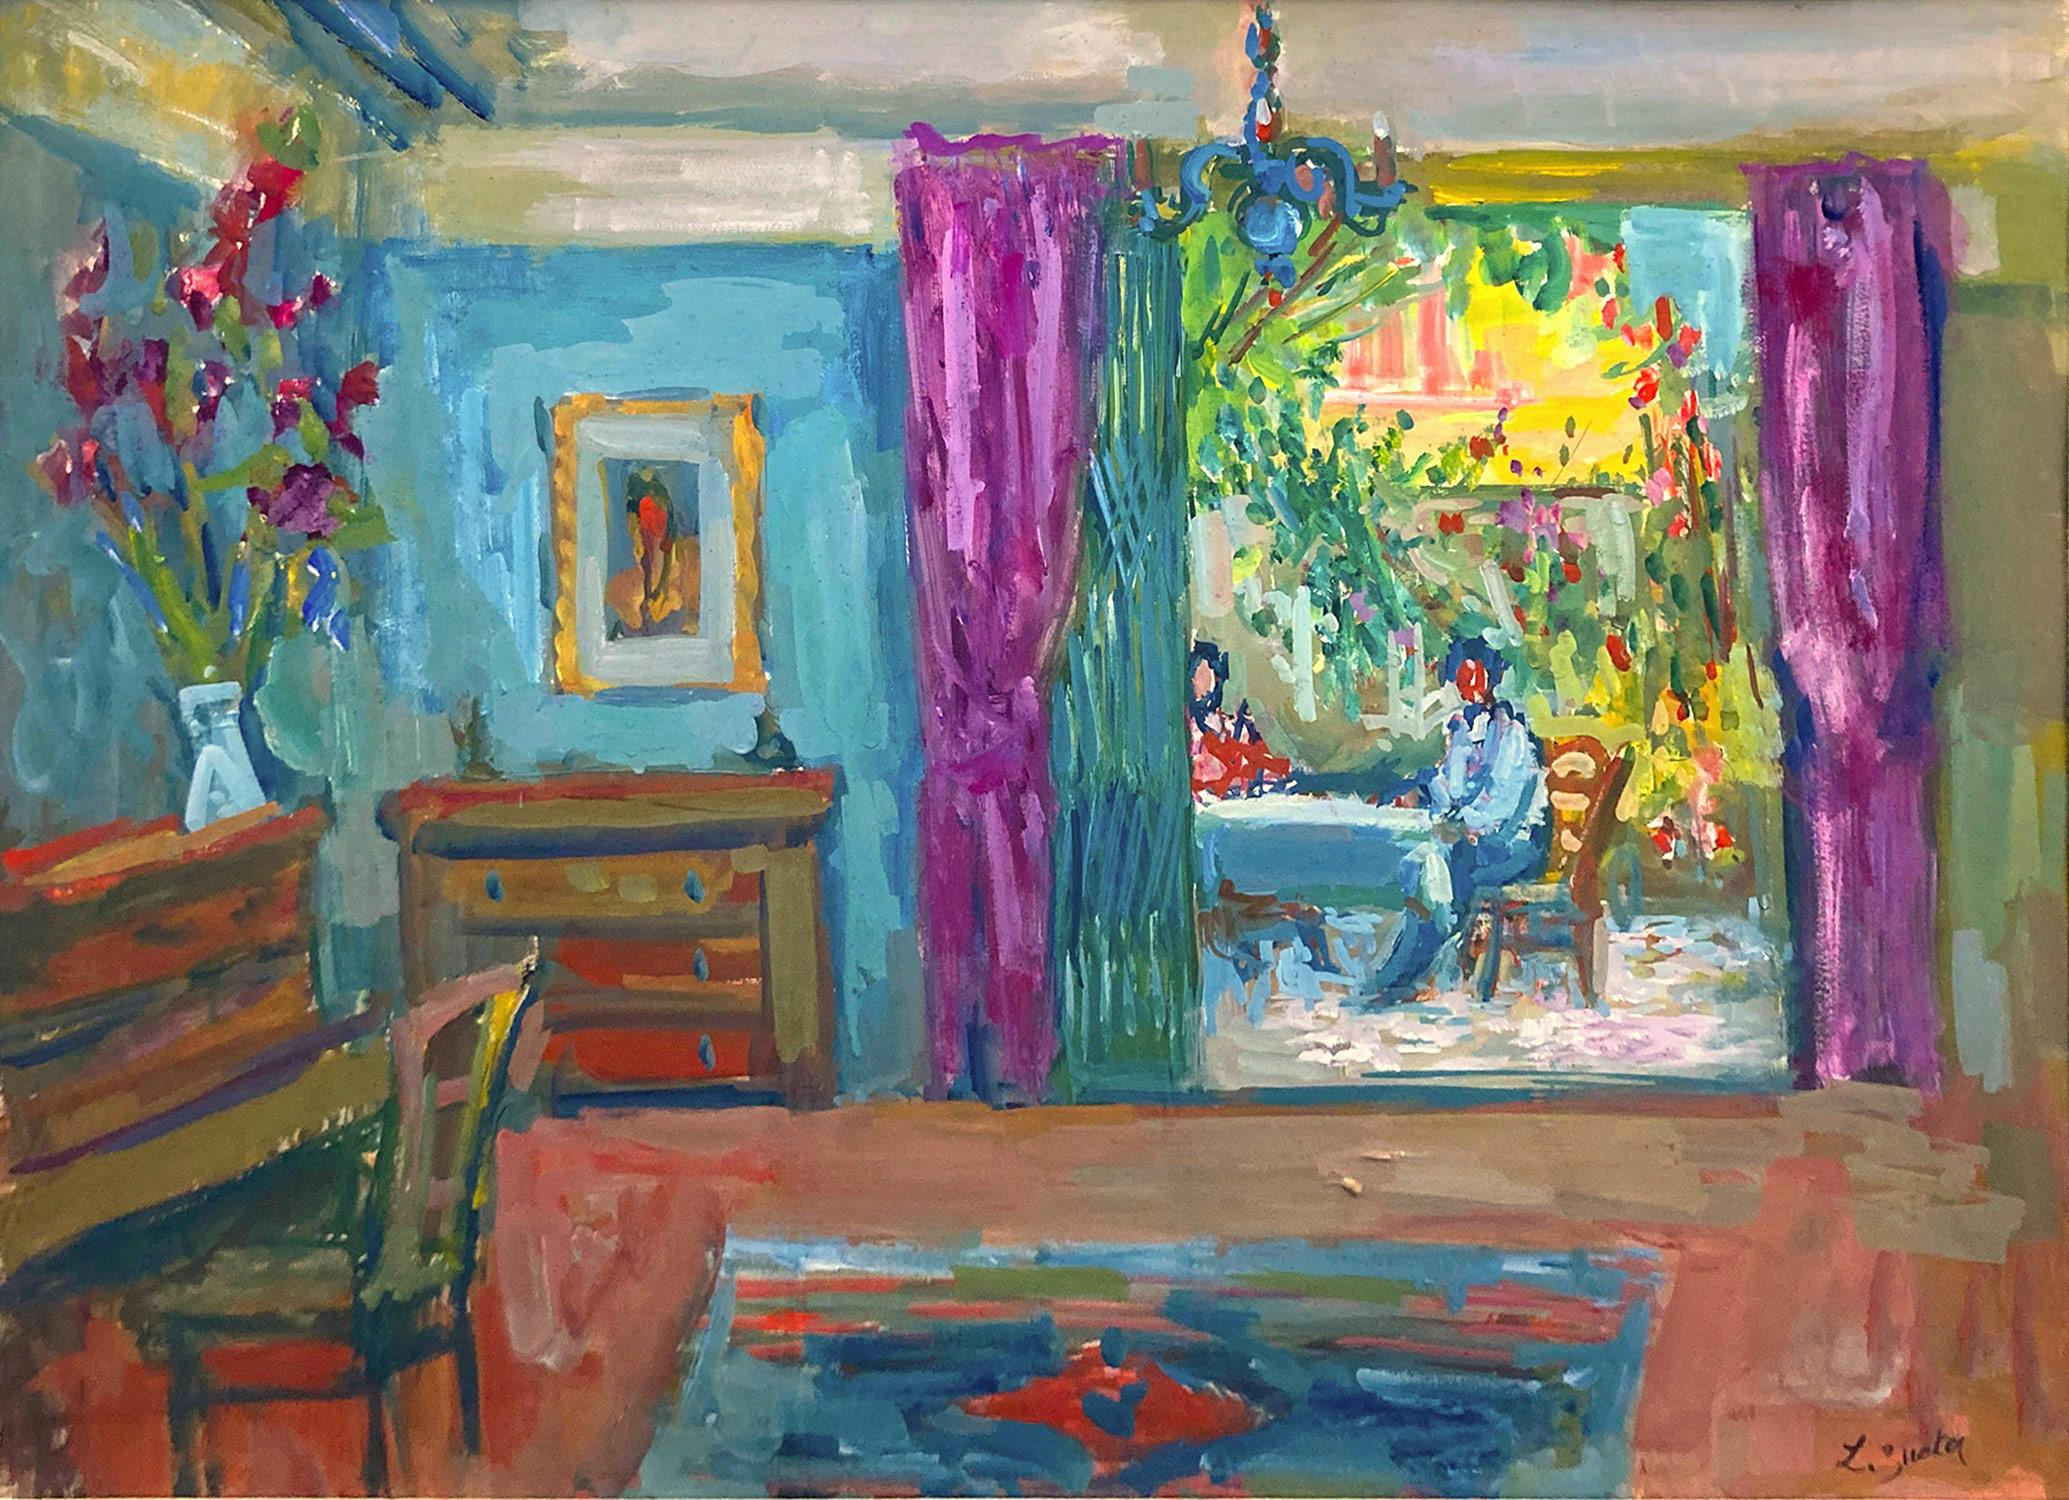 This painting depicts an interior scene done in Paris. The fun details are what make this painting so attractive and desirable; the living room opens out into the terrace, as we are drawn into this intimate moment that the artist creates. The piece